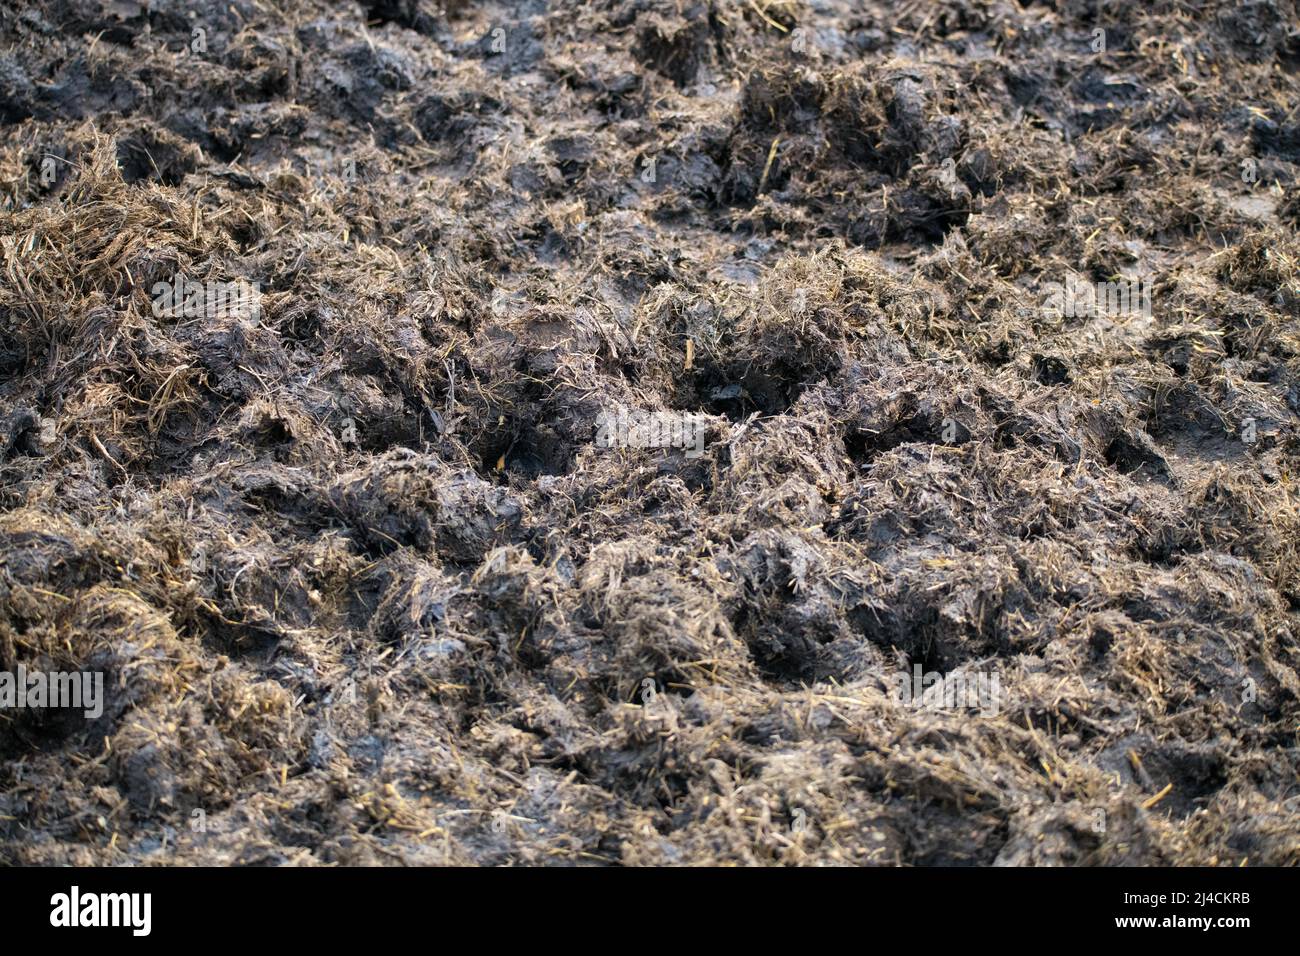 Domestic cattle (Bos taurus), soil over-exploited by grazing, environmental damage, Velbert, Germany Stock Photo